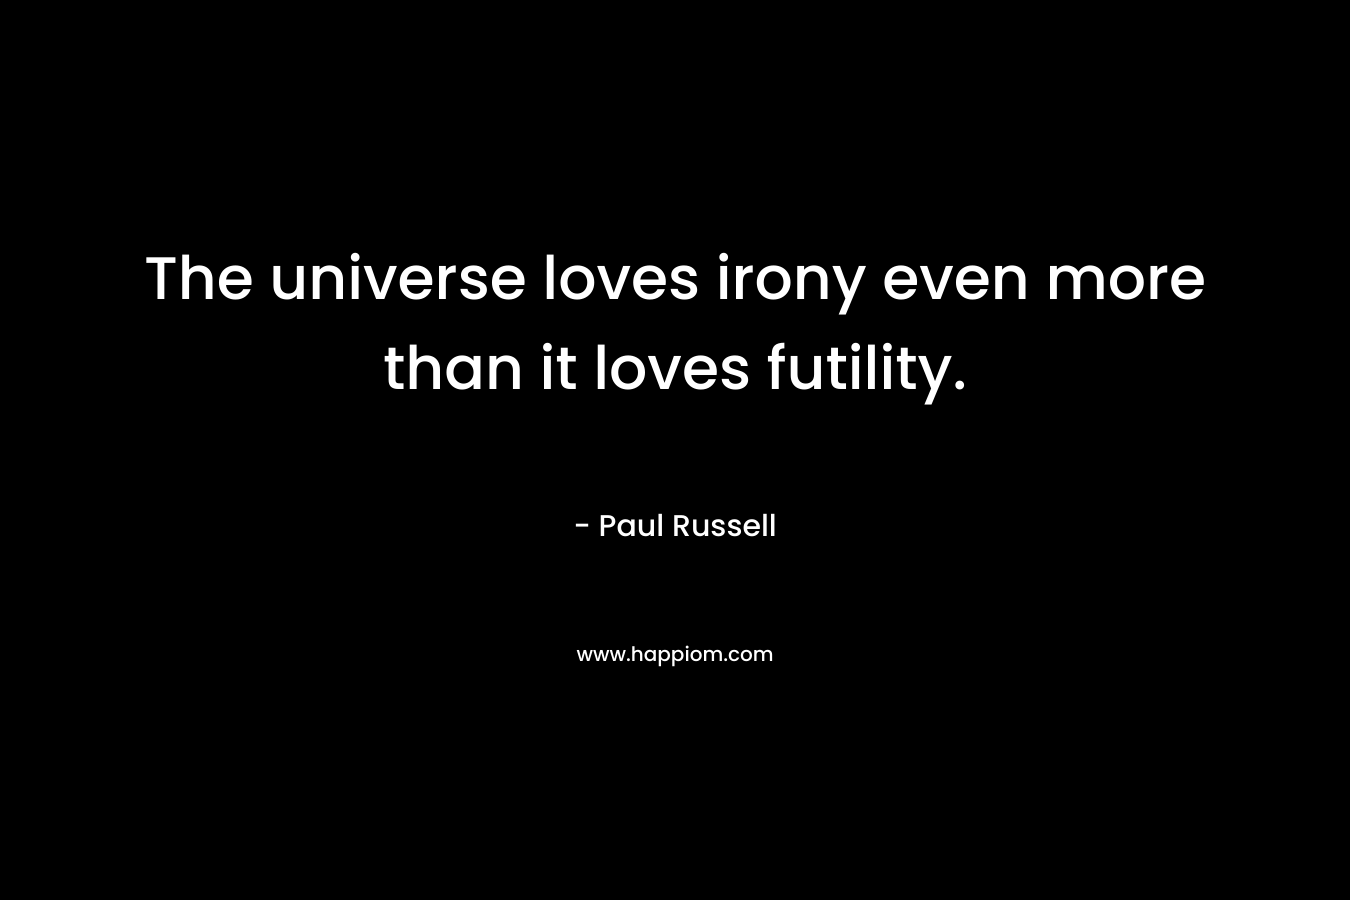 The universe loves irony even more than it loves futility.